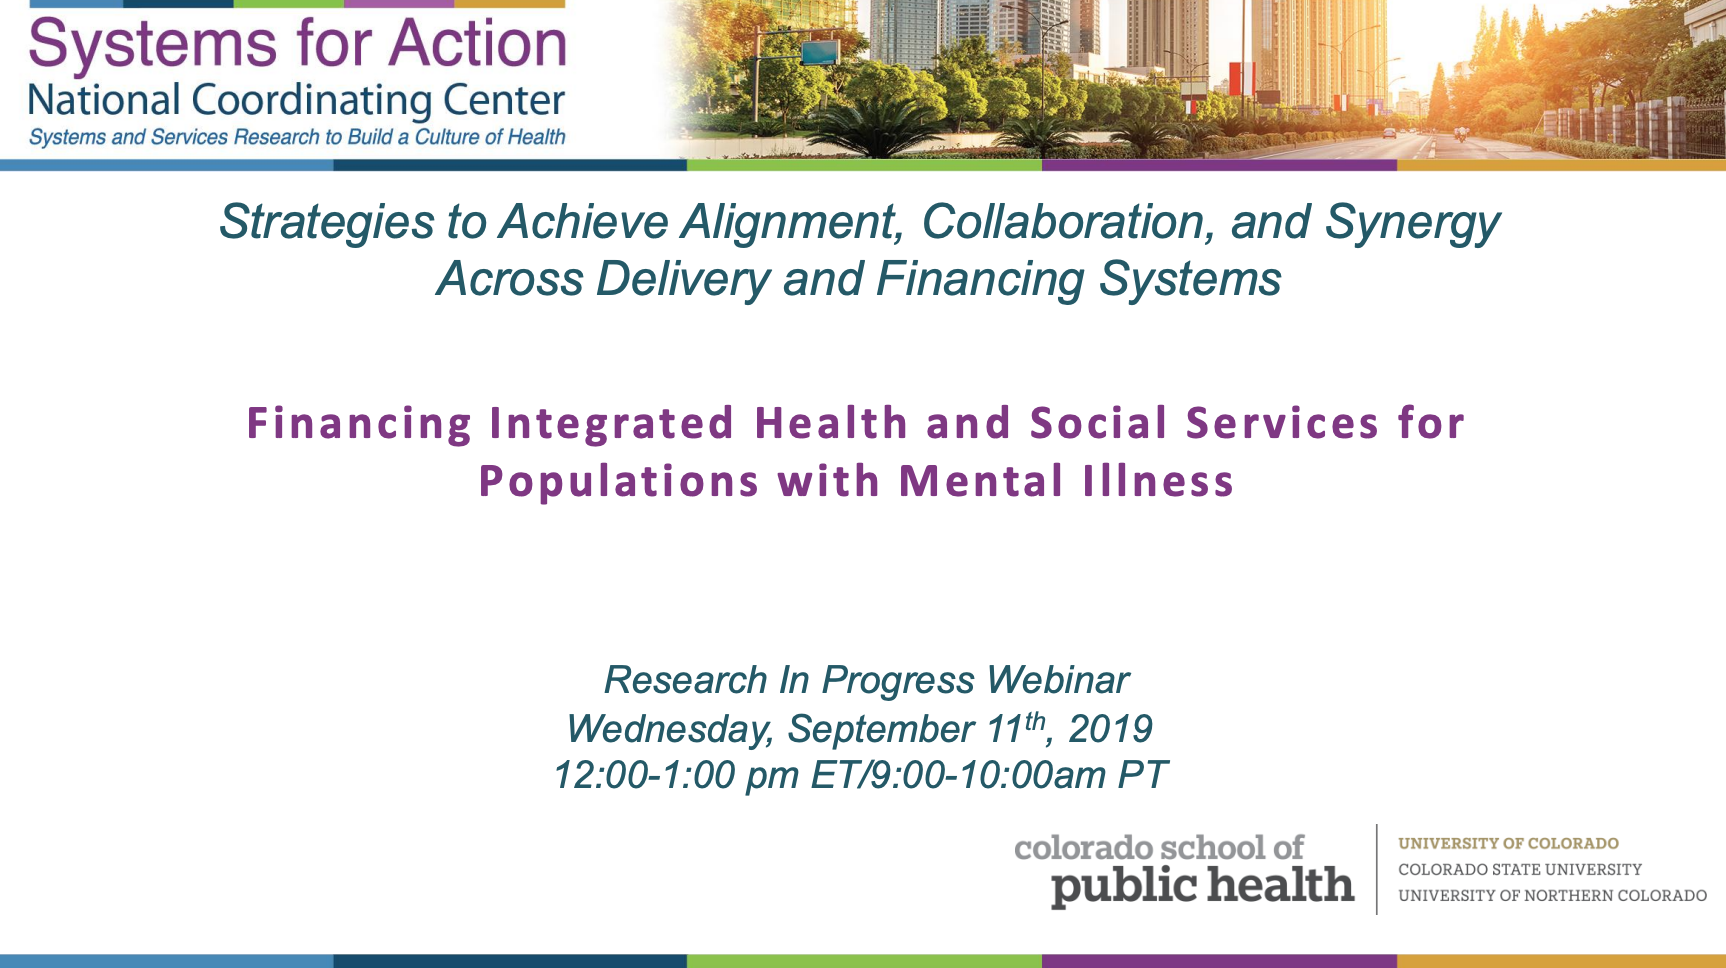 Strategies to Achieve Alignment, Collaboration, and Synergy Across Delivery and Financing Systems: Financing Integrated Health and Social Services for Populations with Mental lliness